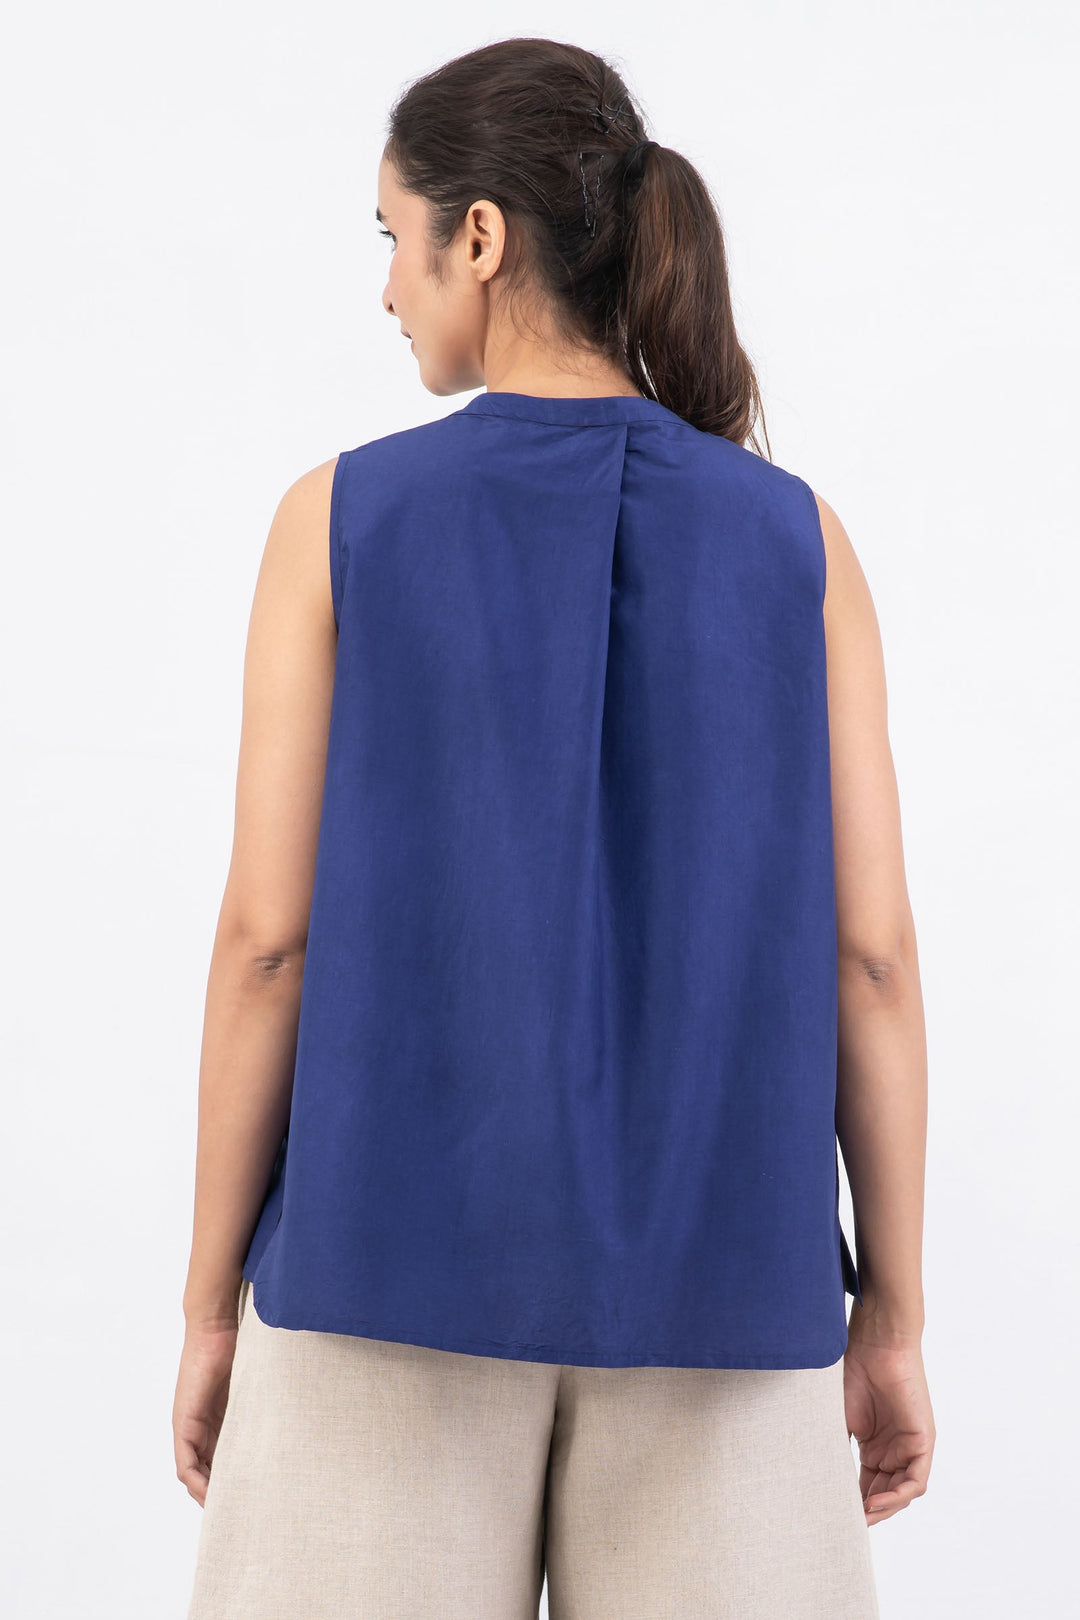 DYED COTTON SILK HEAVY VOILE WAVY BAND COLLAR SHELL TOP - dh1556-blu -